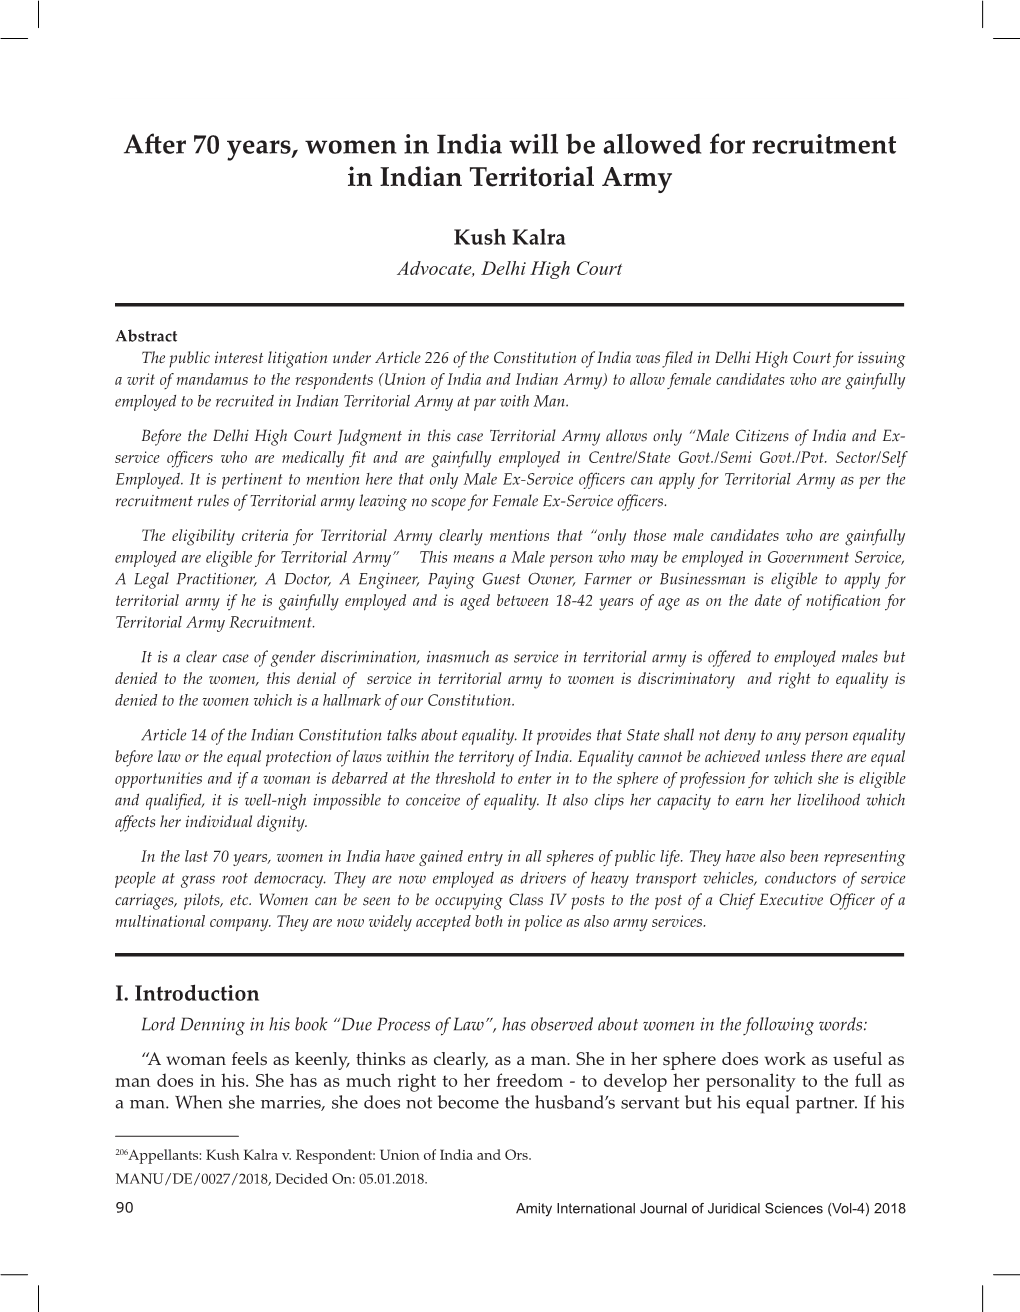 Amity International Journal of Juridical Sciences.Indd